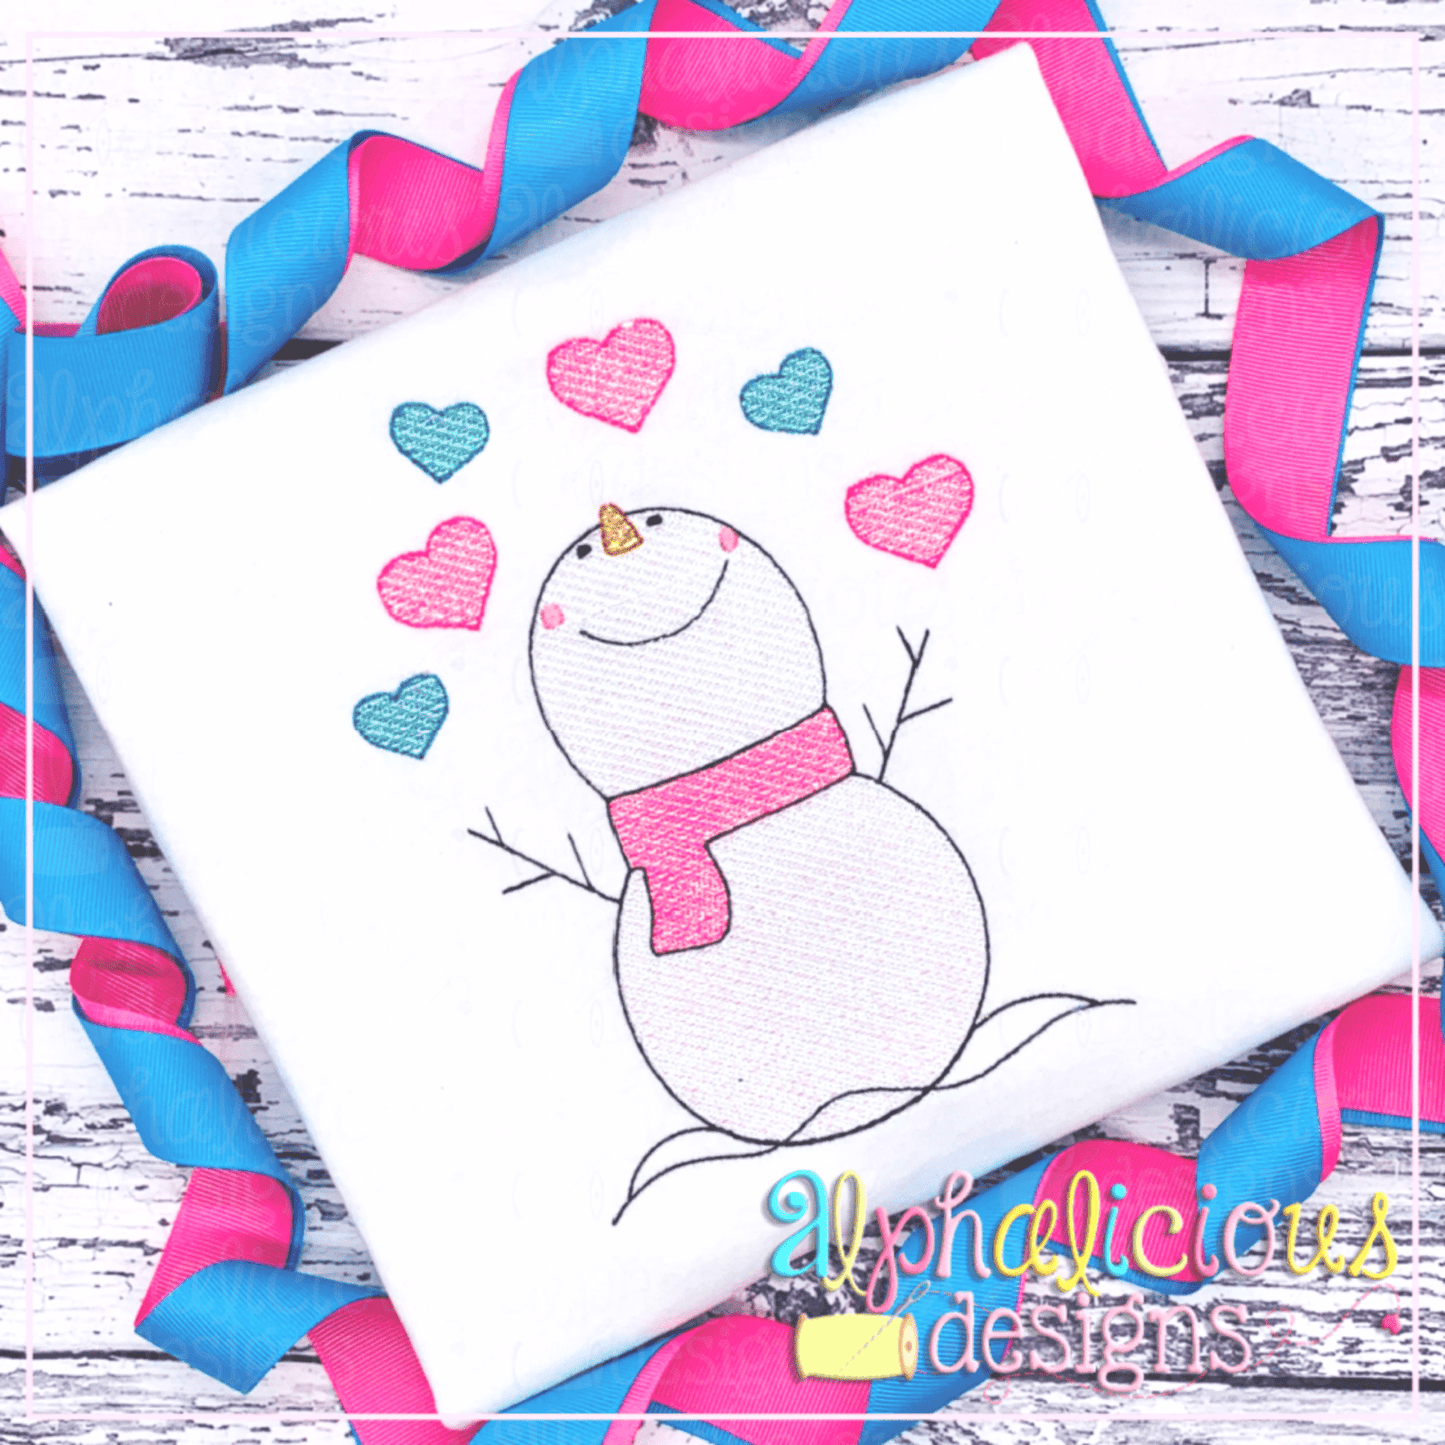 Snowman with Hearts- Sketch